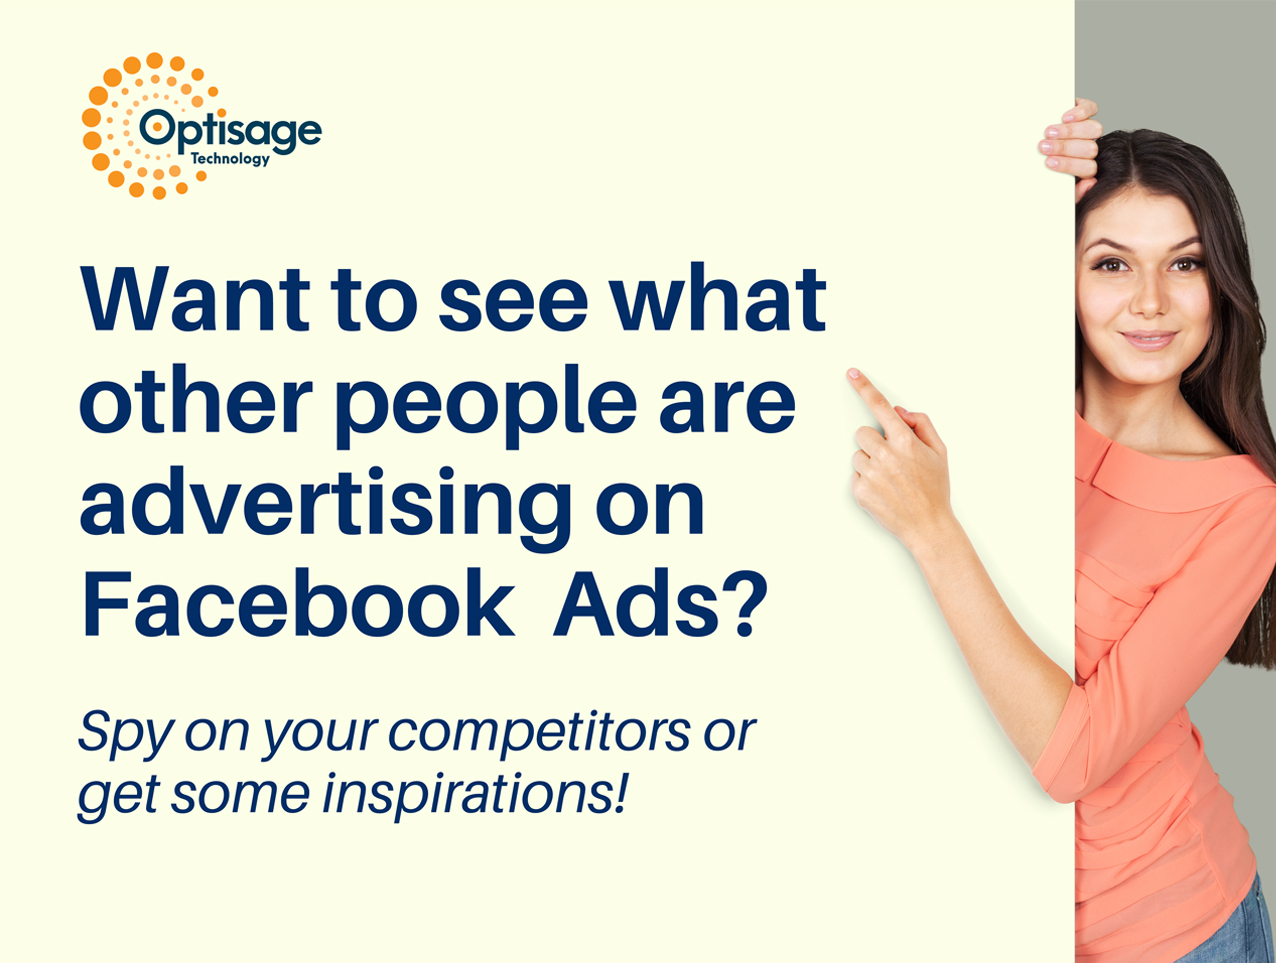 want to see what other advertisers are doing on Facebook?